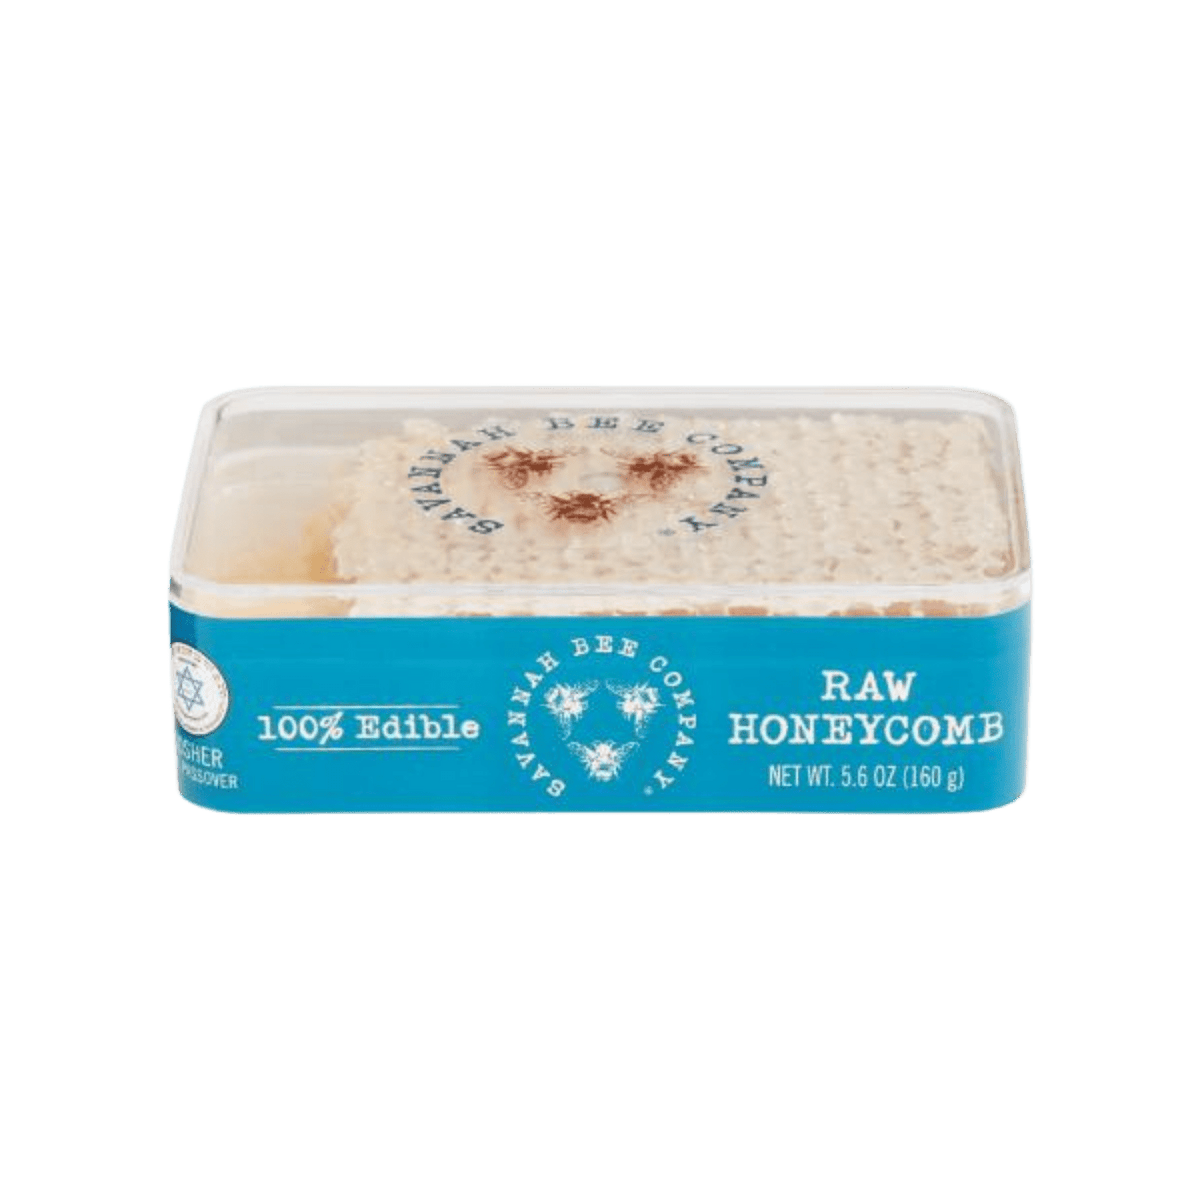 Lolli and Pops Better For You Savannah Bee Company Acacia Honeycomb Mini